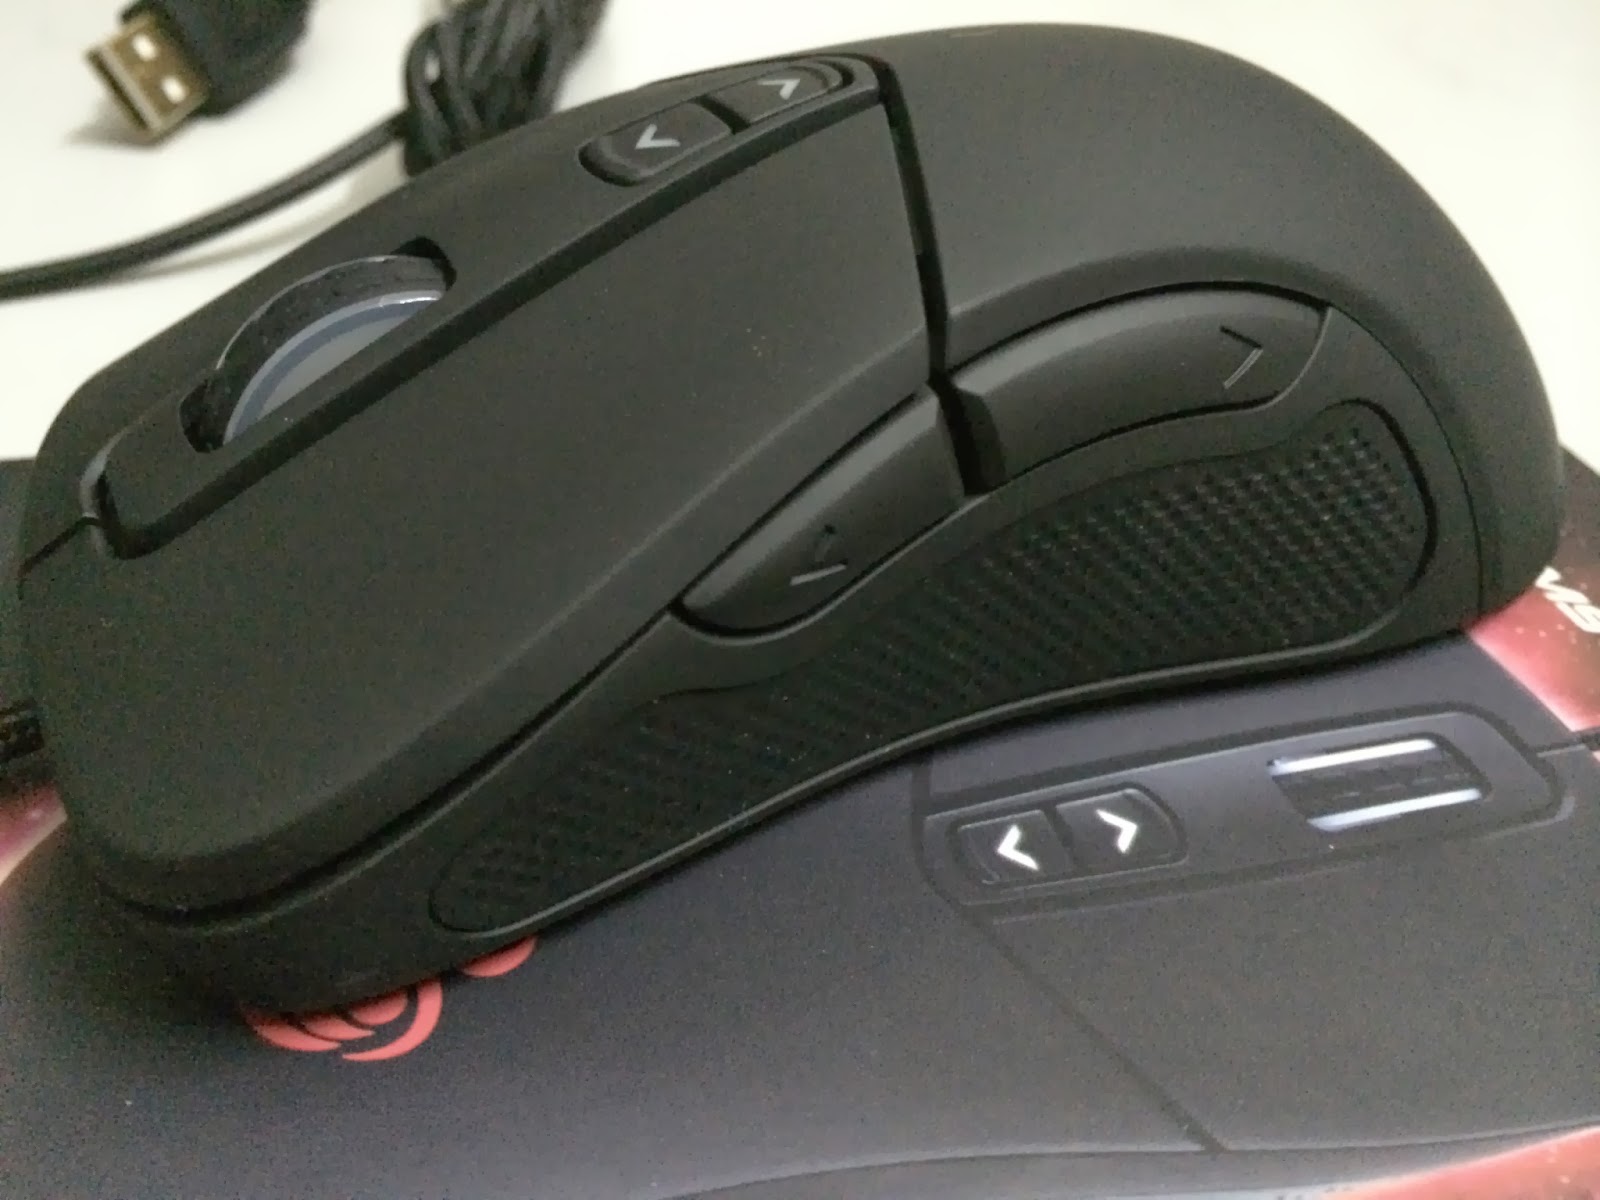 A Sneak Preview On The CM Storm Mizar Laser Gaming Mice 16